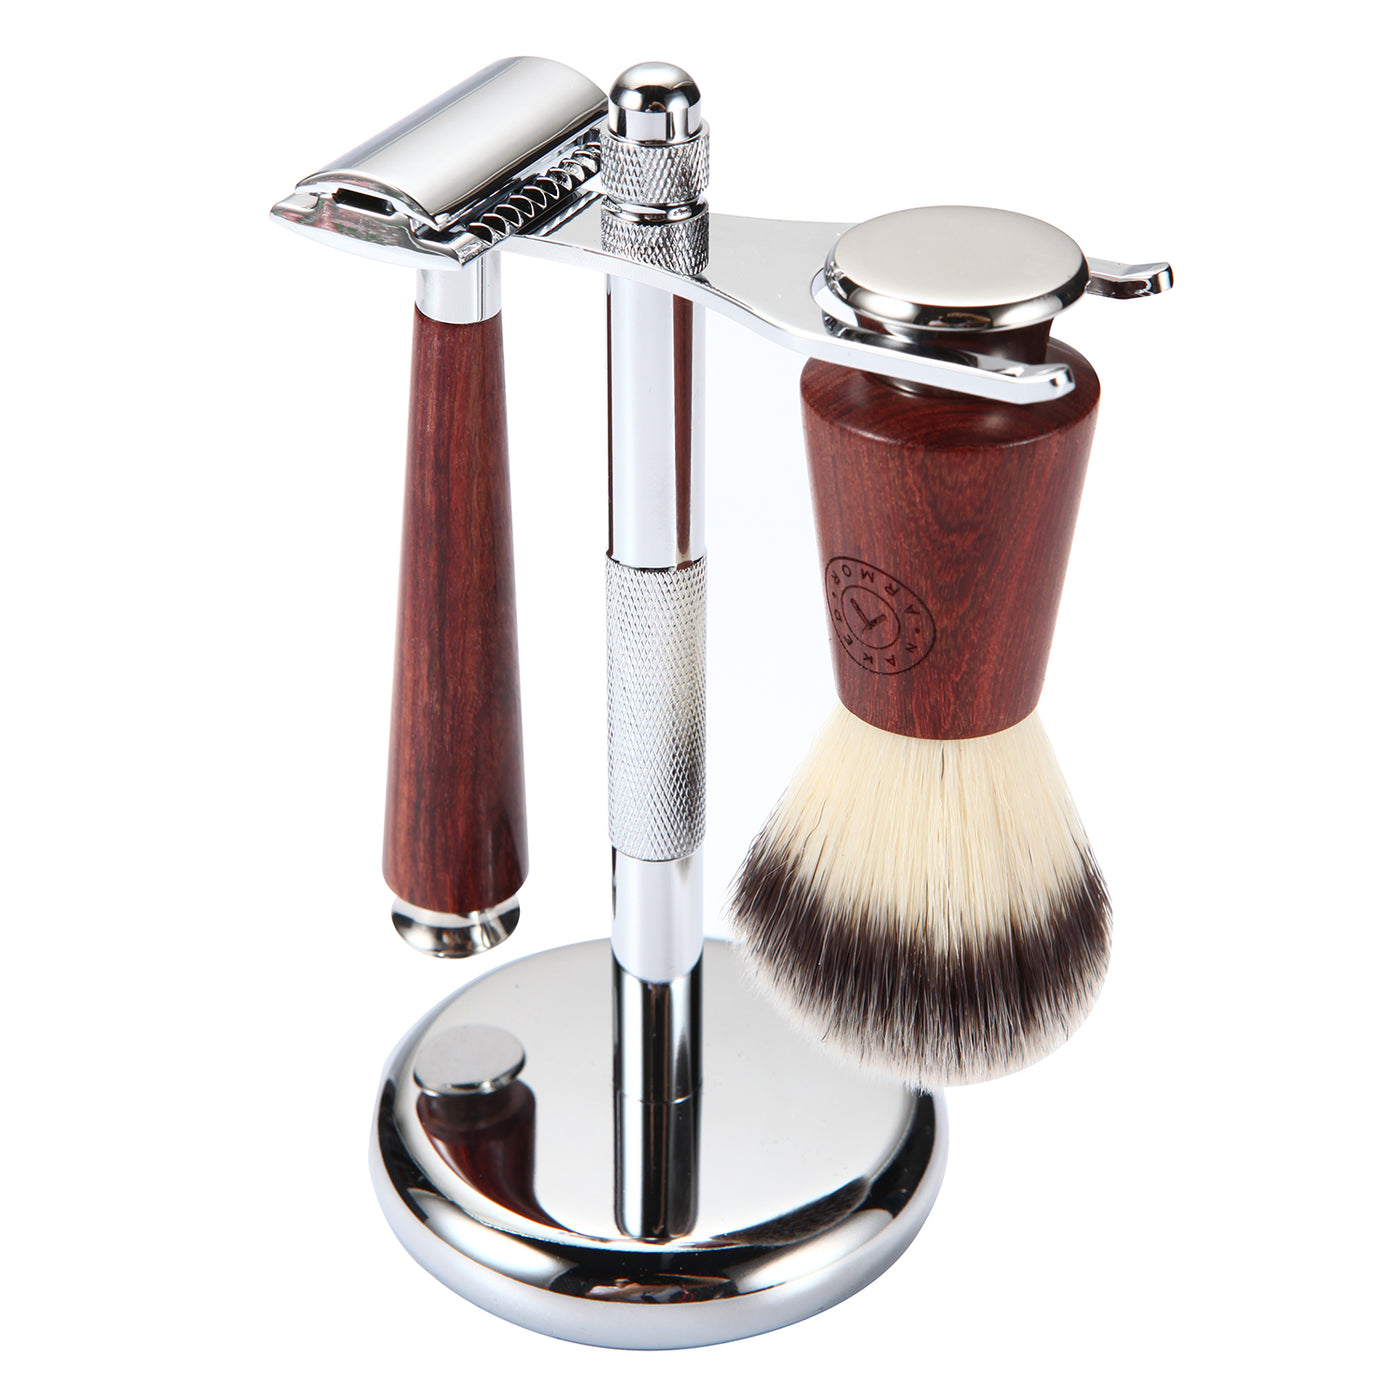  Tor Safety Razor and Stand Kit by Naked Armor sold by Naked Armor Razors